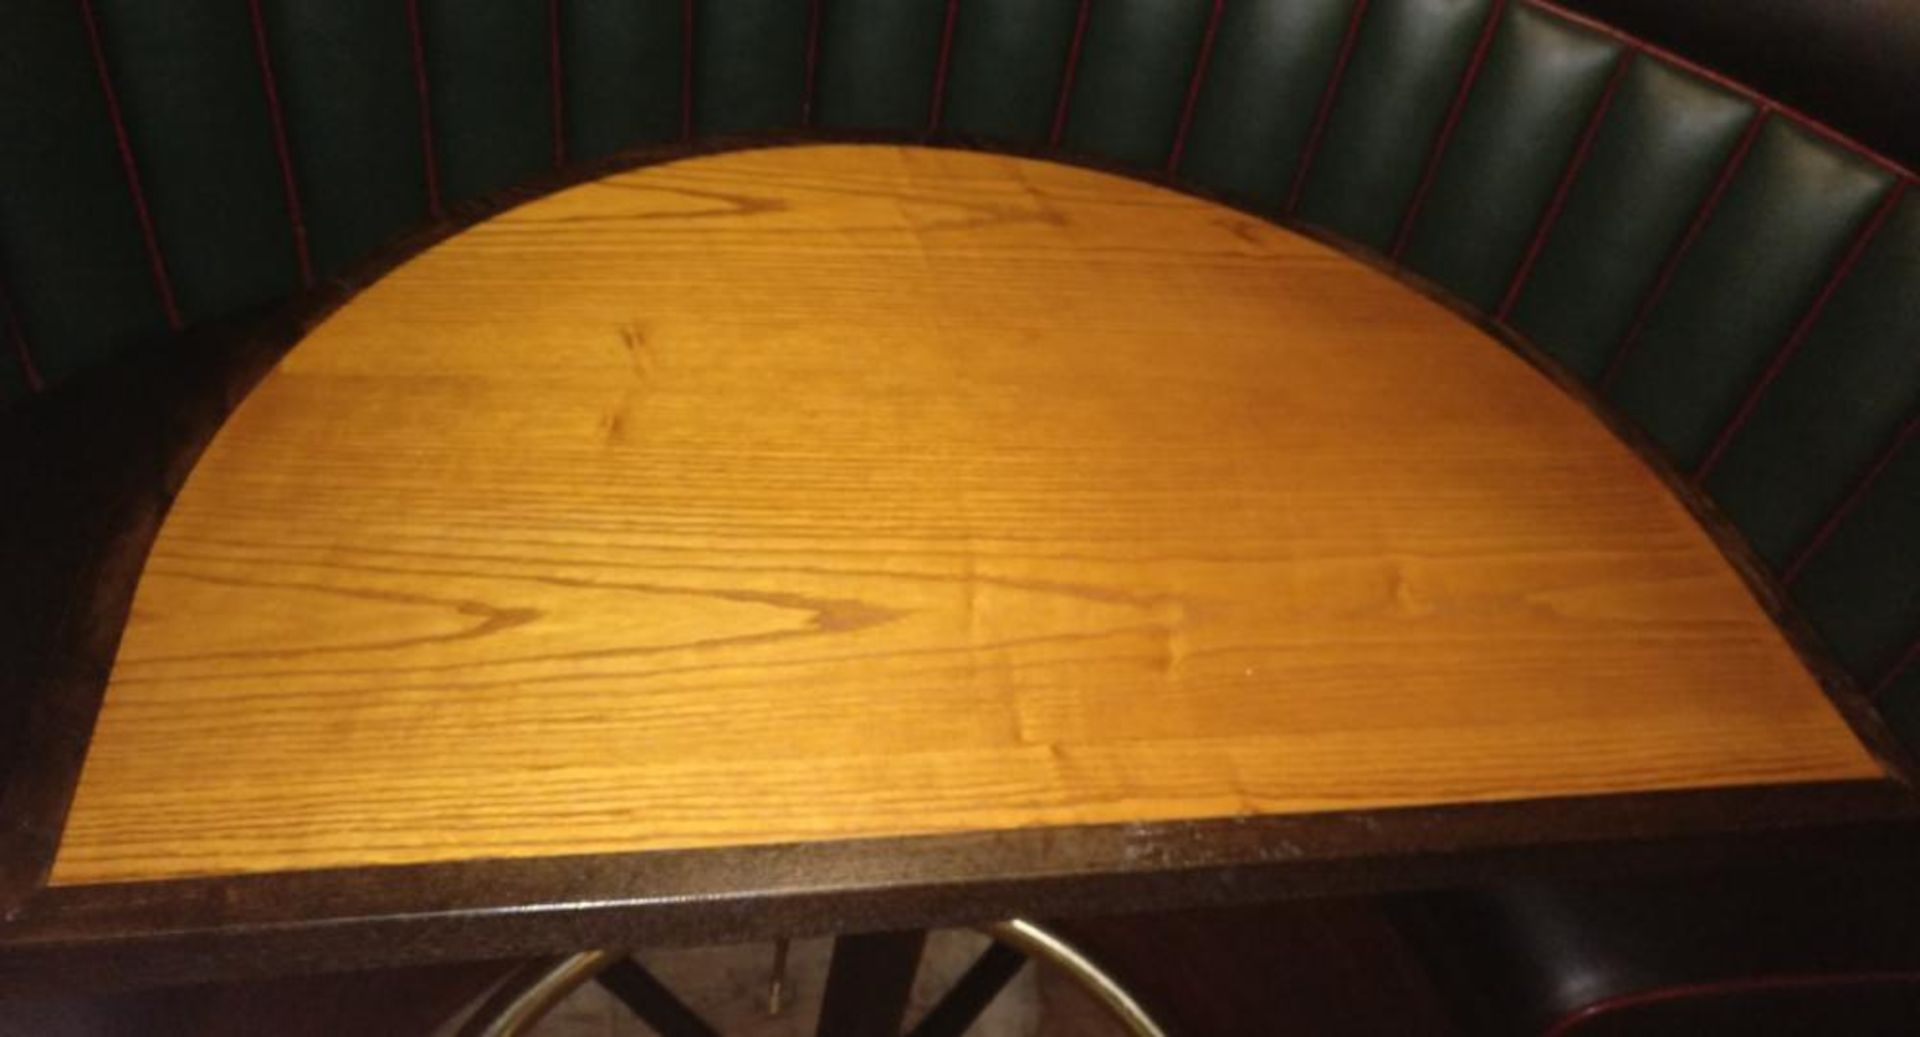 5 x Semi Circle Restaurant Poser Tables - Features Cast Iron Bases With Light Wood Tops and Dark - Image 2 of 5